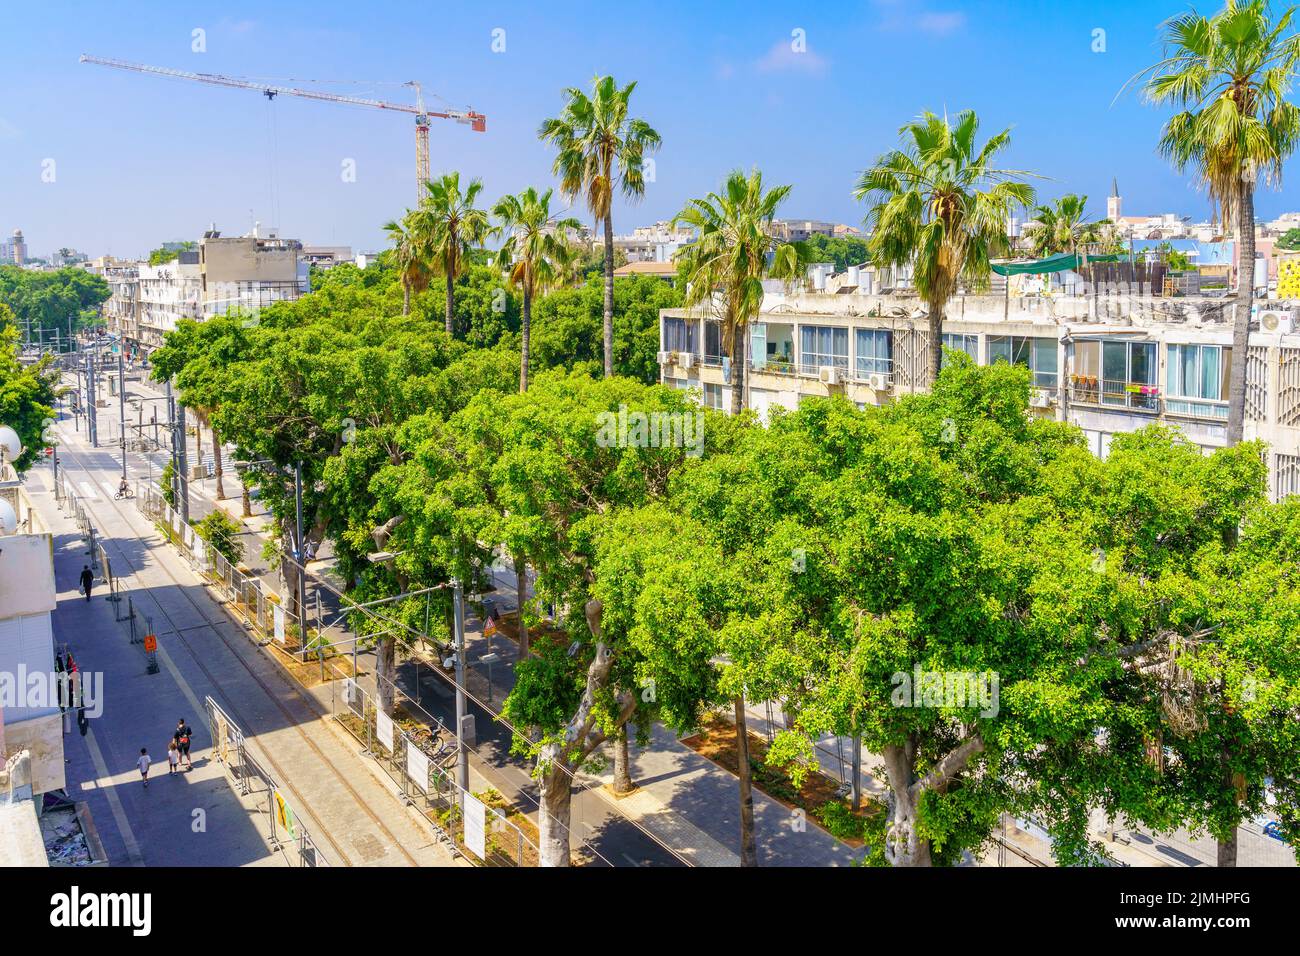 Tel-Aviv, Israel - May 26, 2022: View of the Jerusalem Boulevard, with locals and visitors, in Jaffa, now part of Tel-Aviv-Yafo, Israel Stock Photo